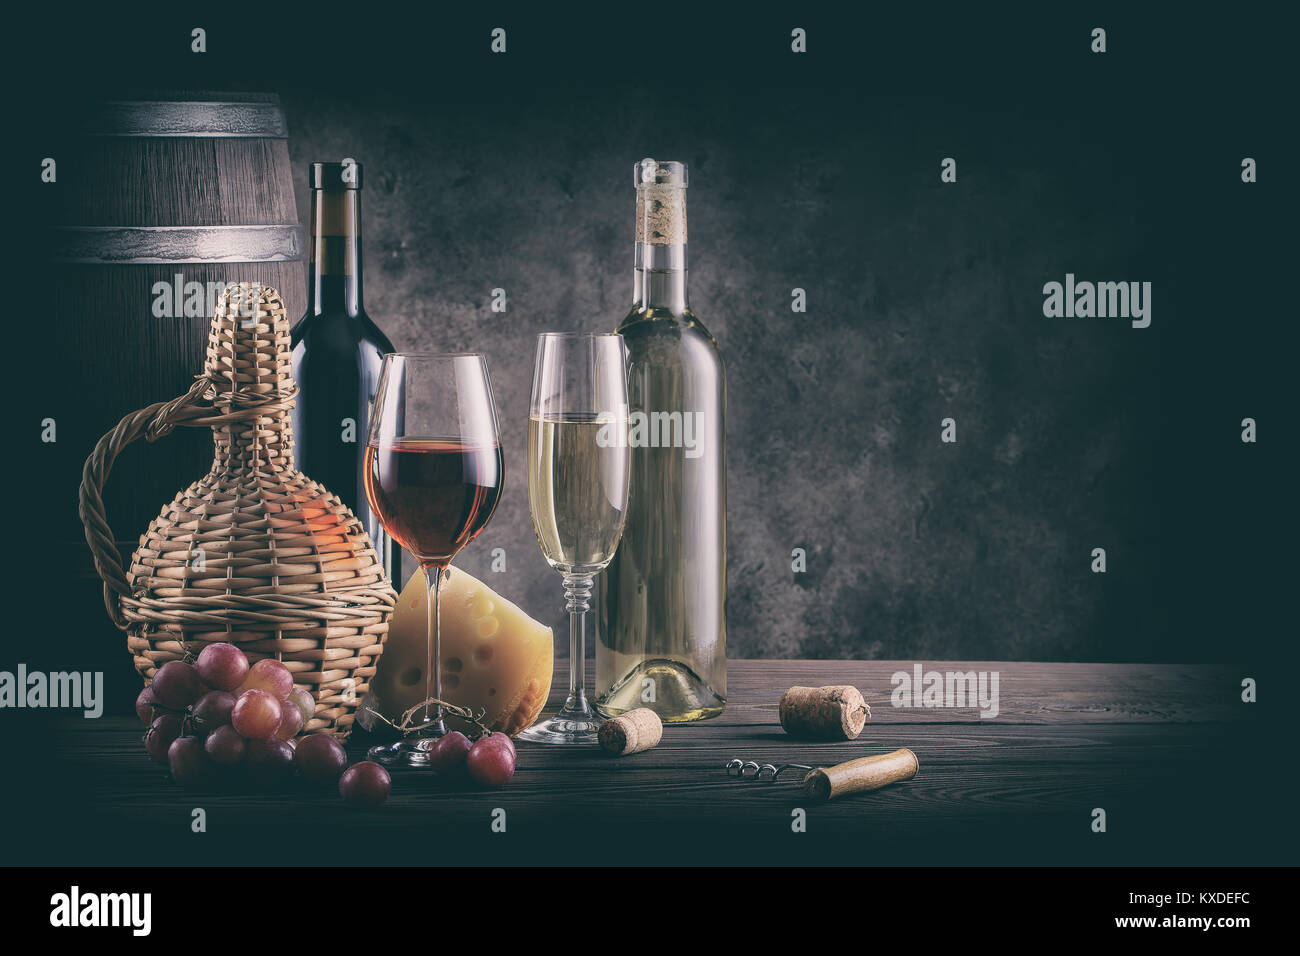 Wine still life on wooden table. Processing for vintage. Bottles, glasses, barrel and grapes with cheese on a wooden table. Stock Photo